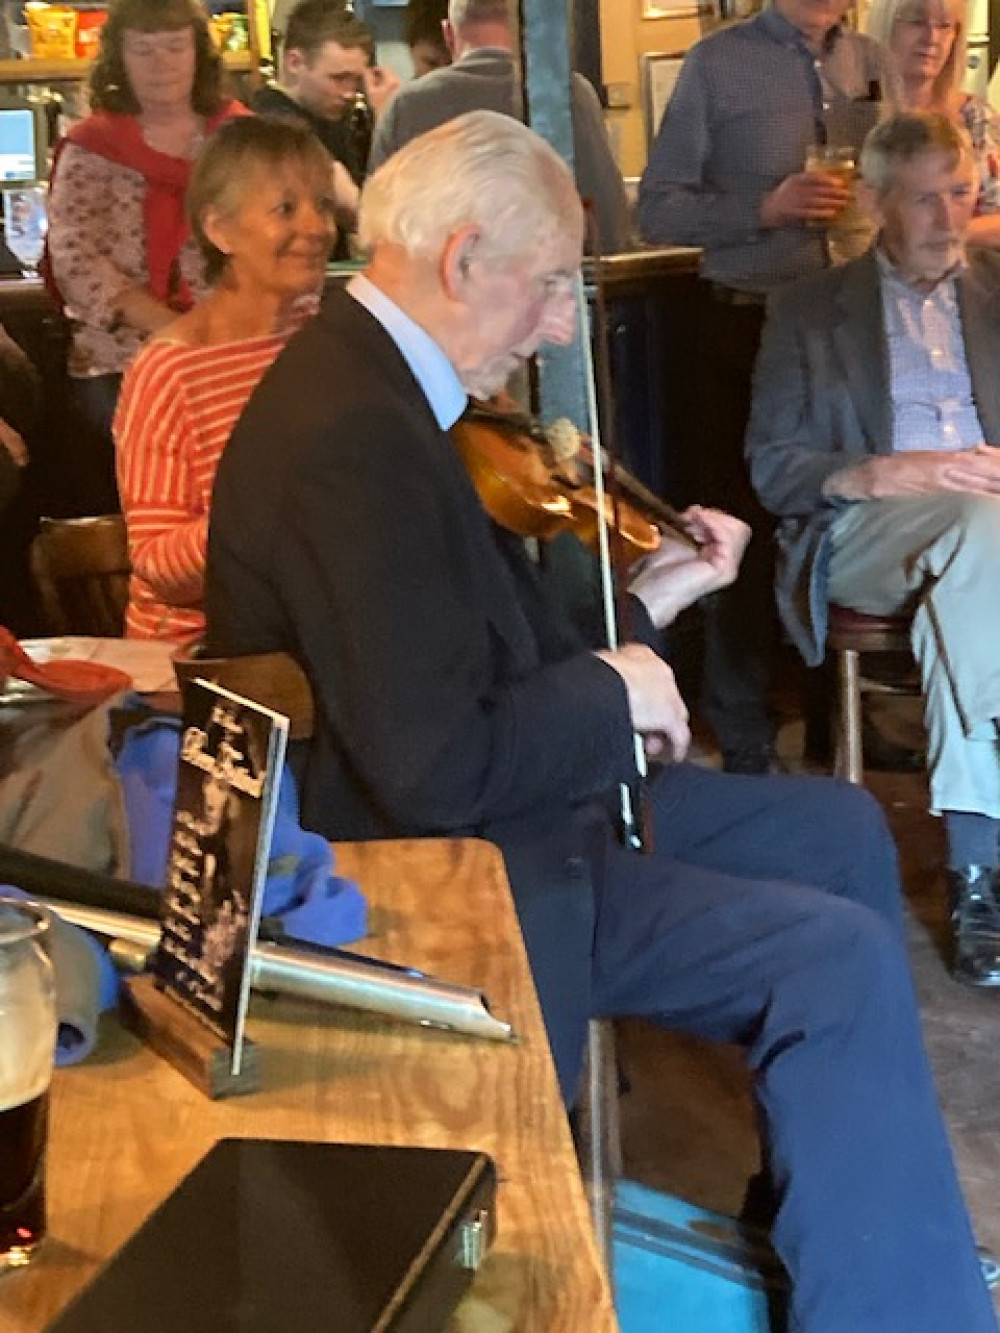 Young at heart: Fiddler Pats Curtin from County Kerry